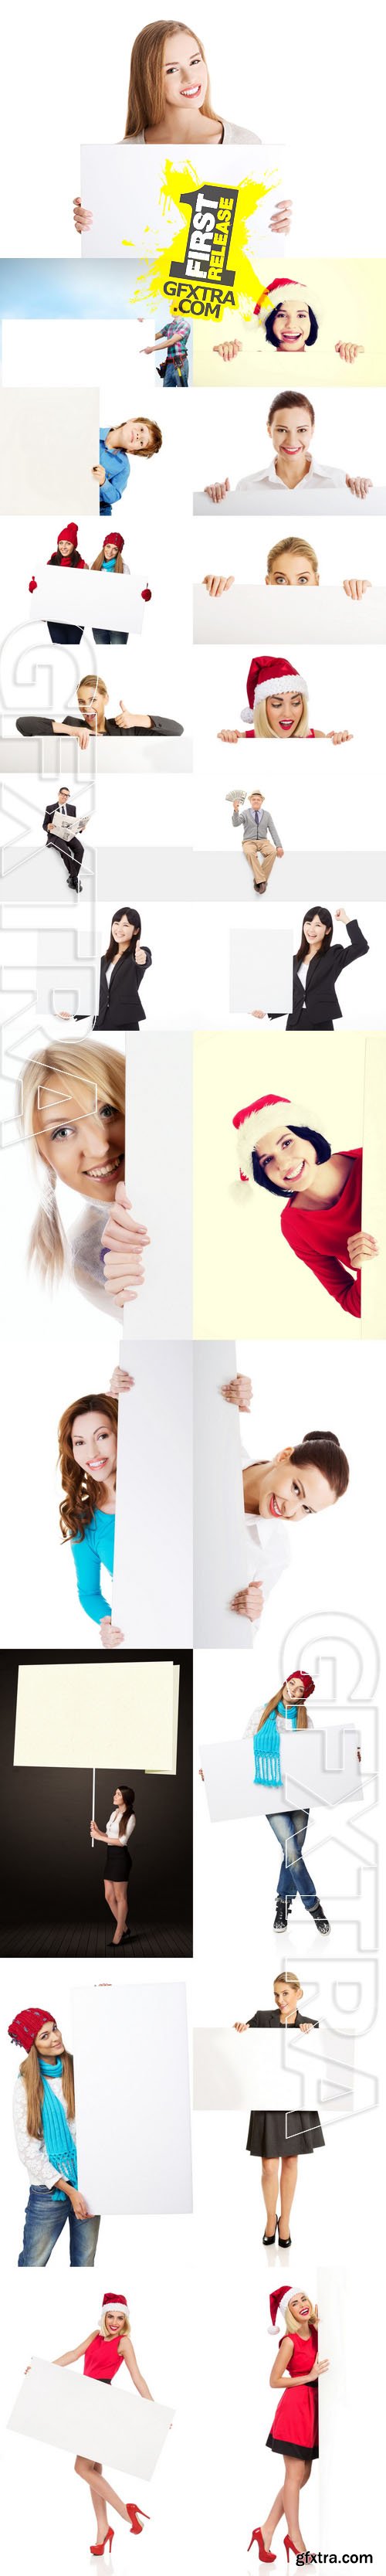 Stock Photos - People with Whiteboard